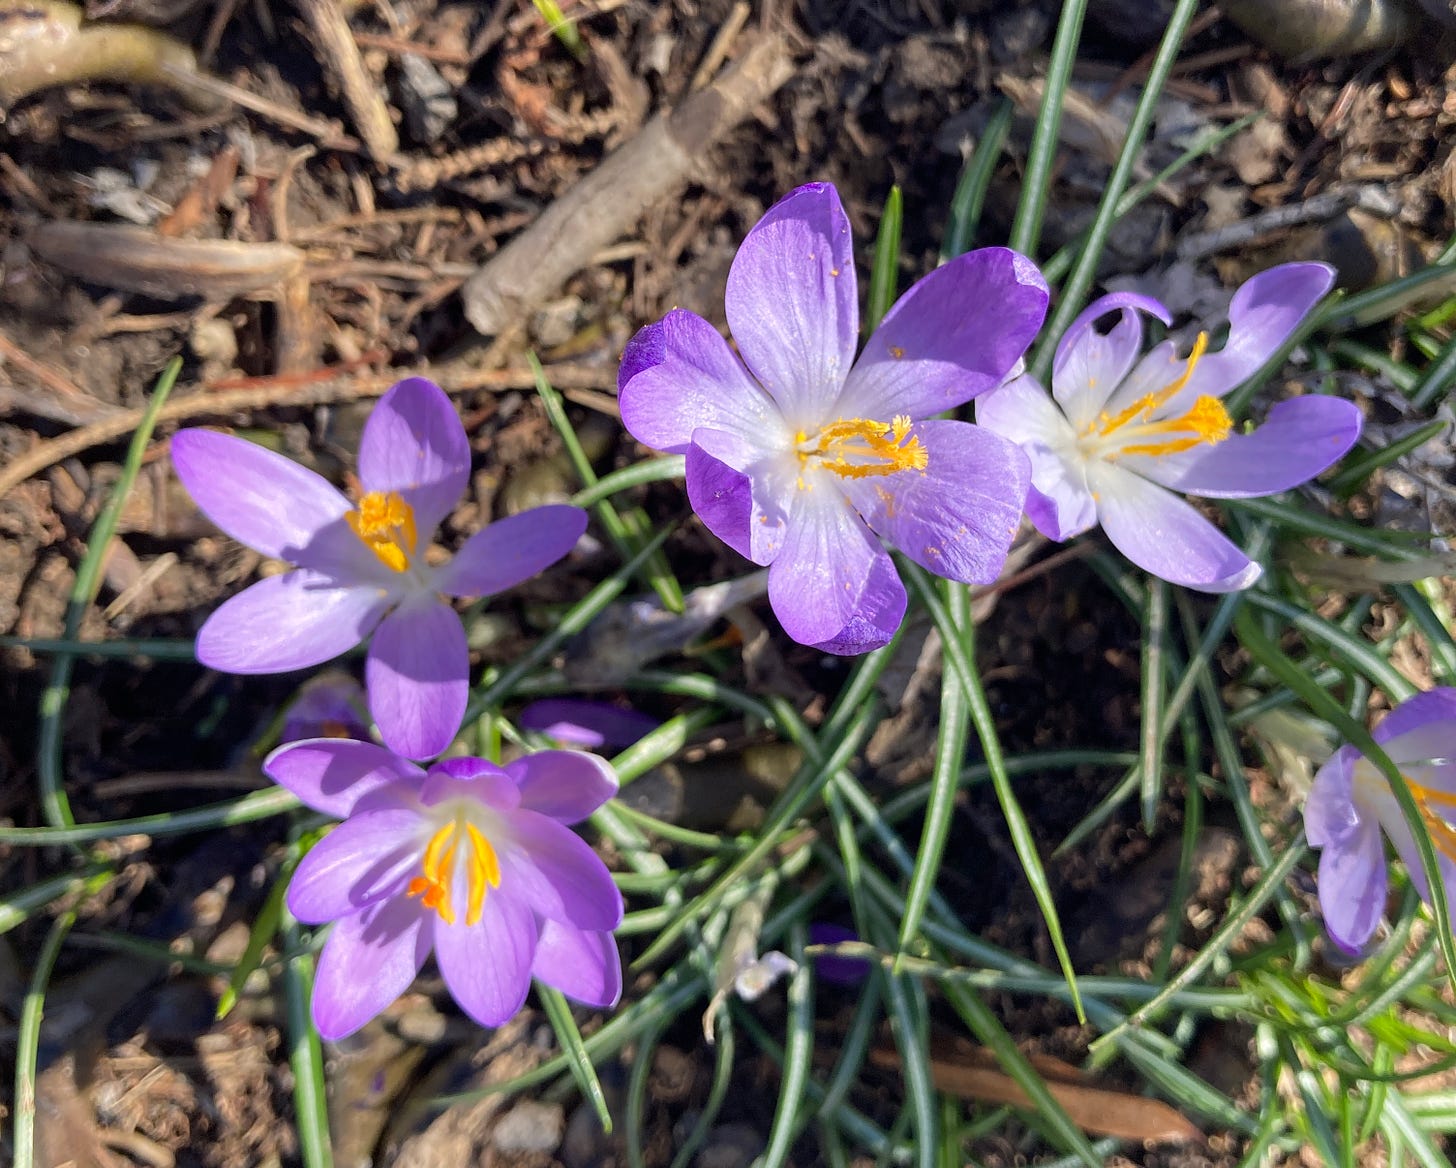 purple crocuses with yellow stamen emerging from the dirt.